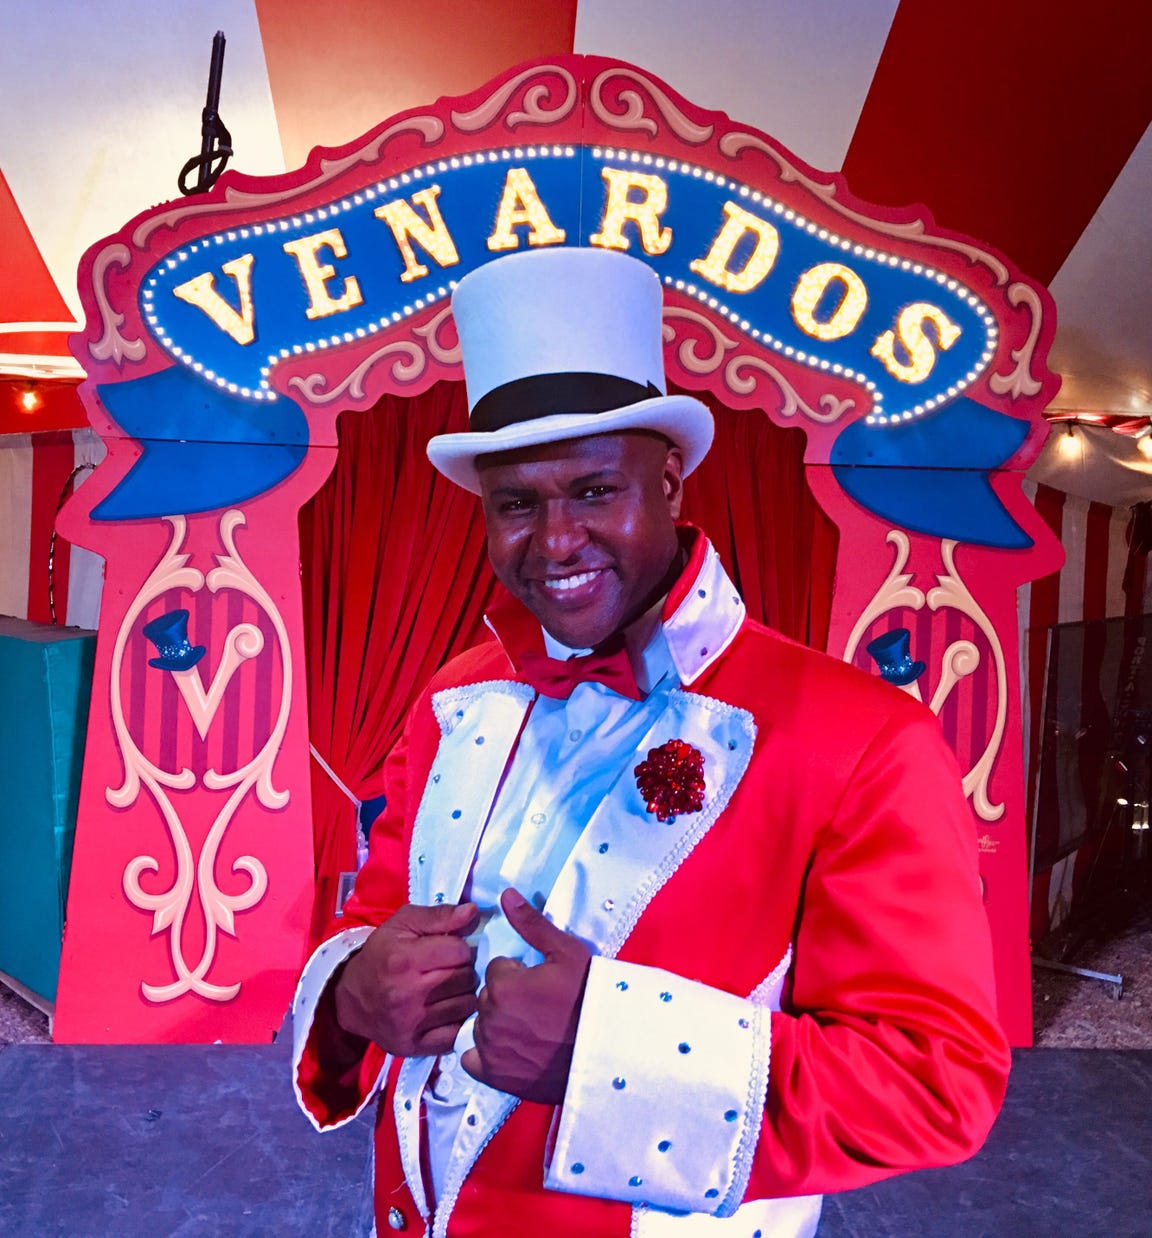 Ringmaster Jonathan Lee Iverson will host the Venardos Circus March 4-15 at Riverview Park in Shreveport.